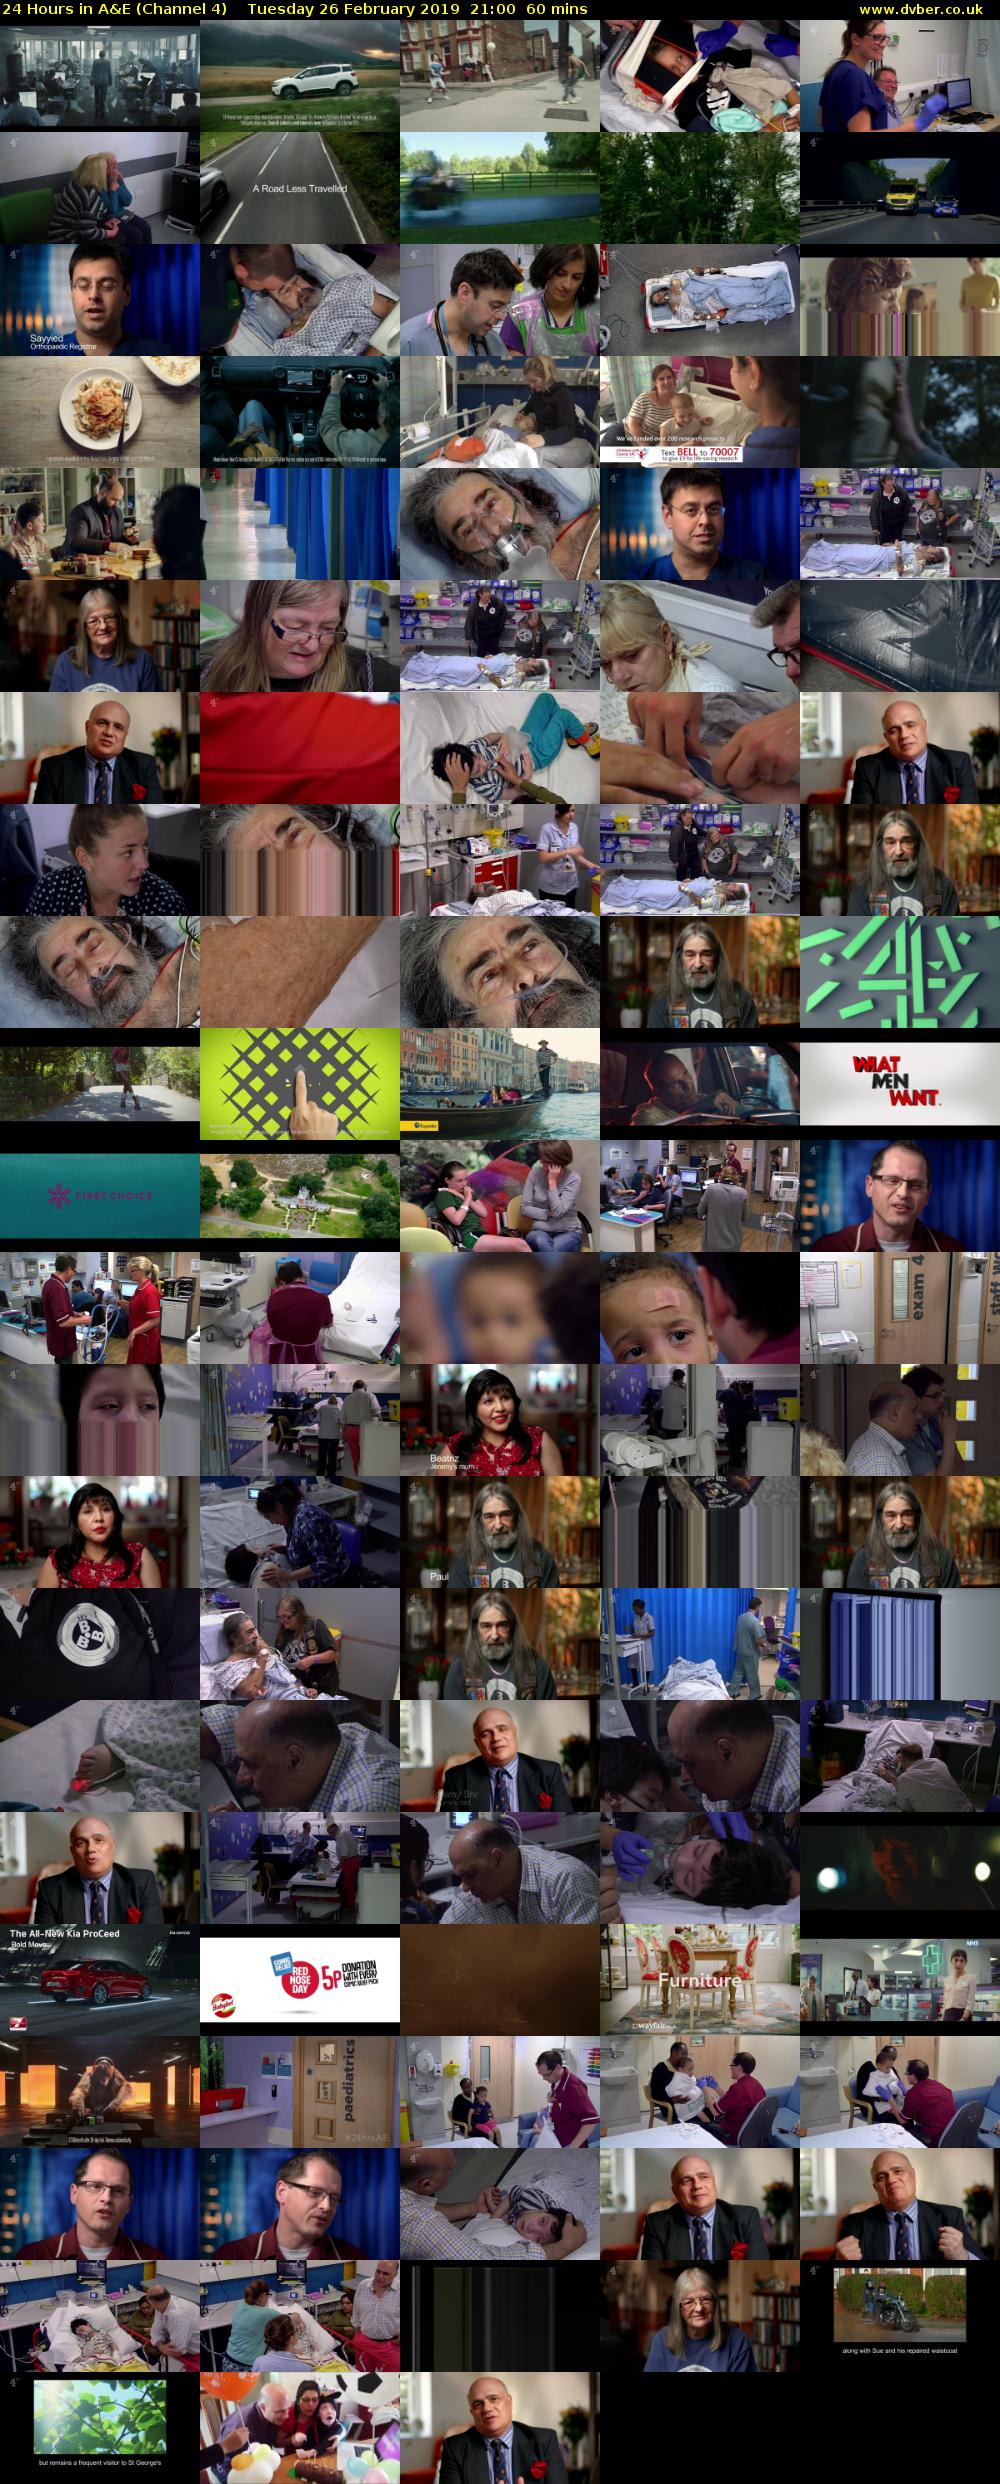 24 Hours in A&E (Channel 4) Tuesday 26 February 2019 21:00 - 22:00